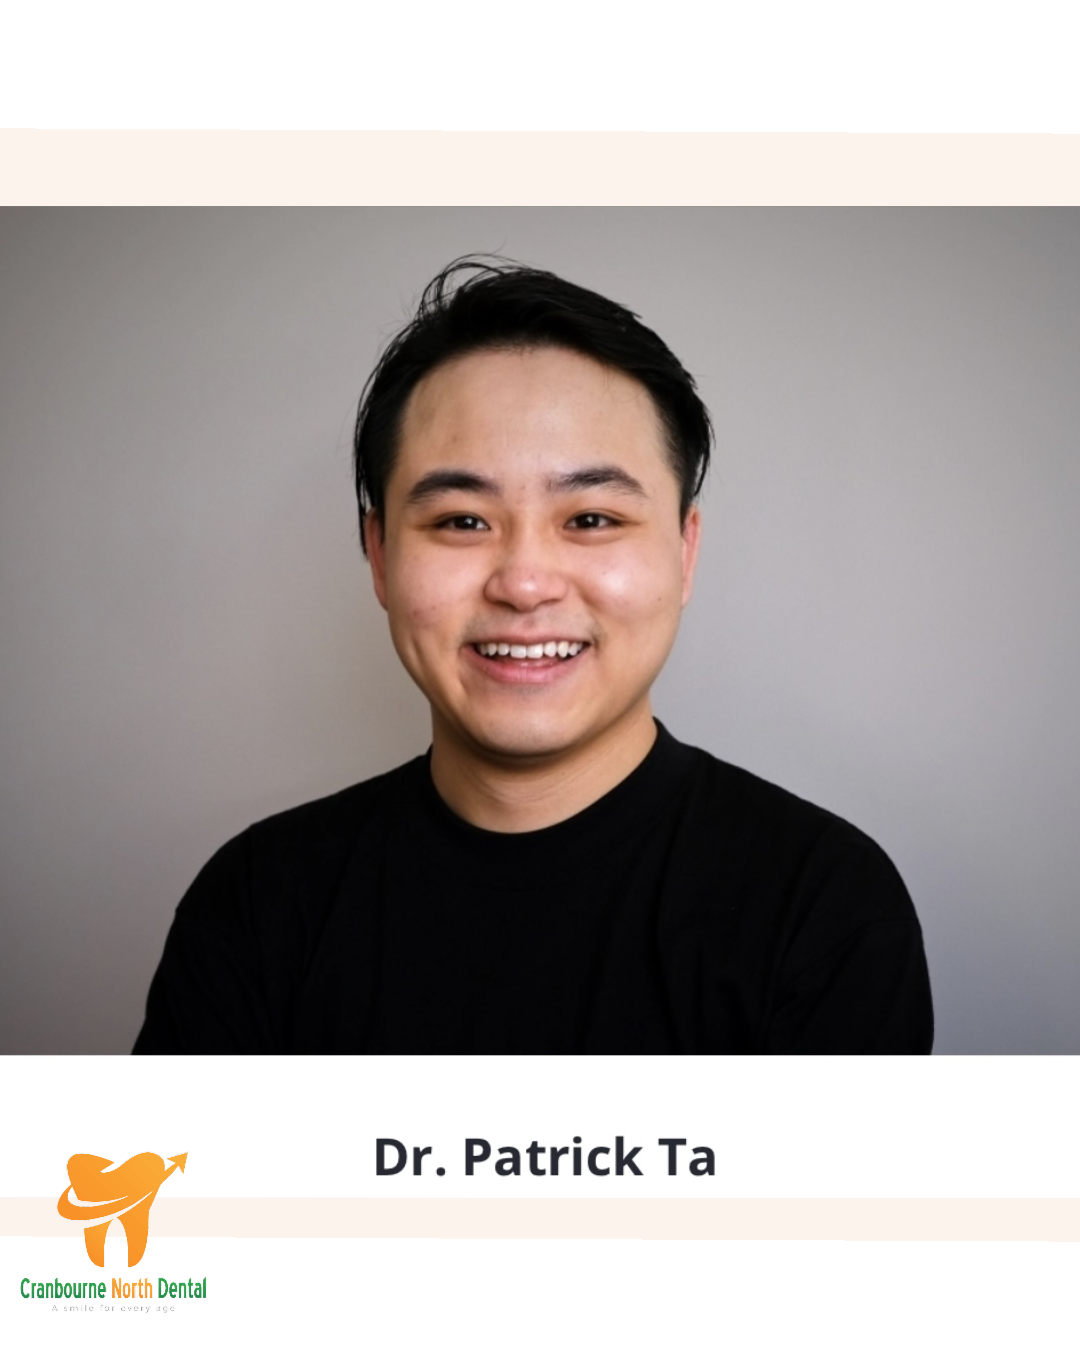 Welcome Dr Patrick!